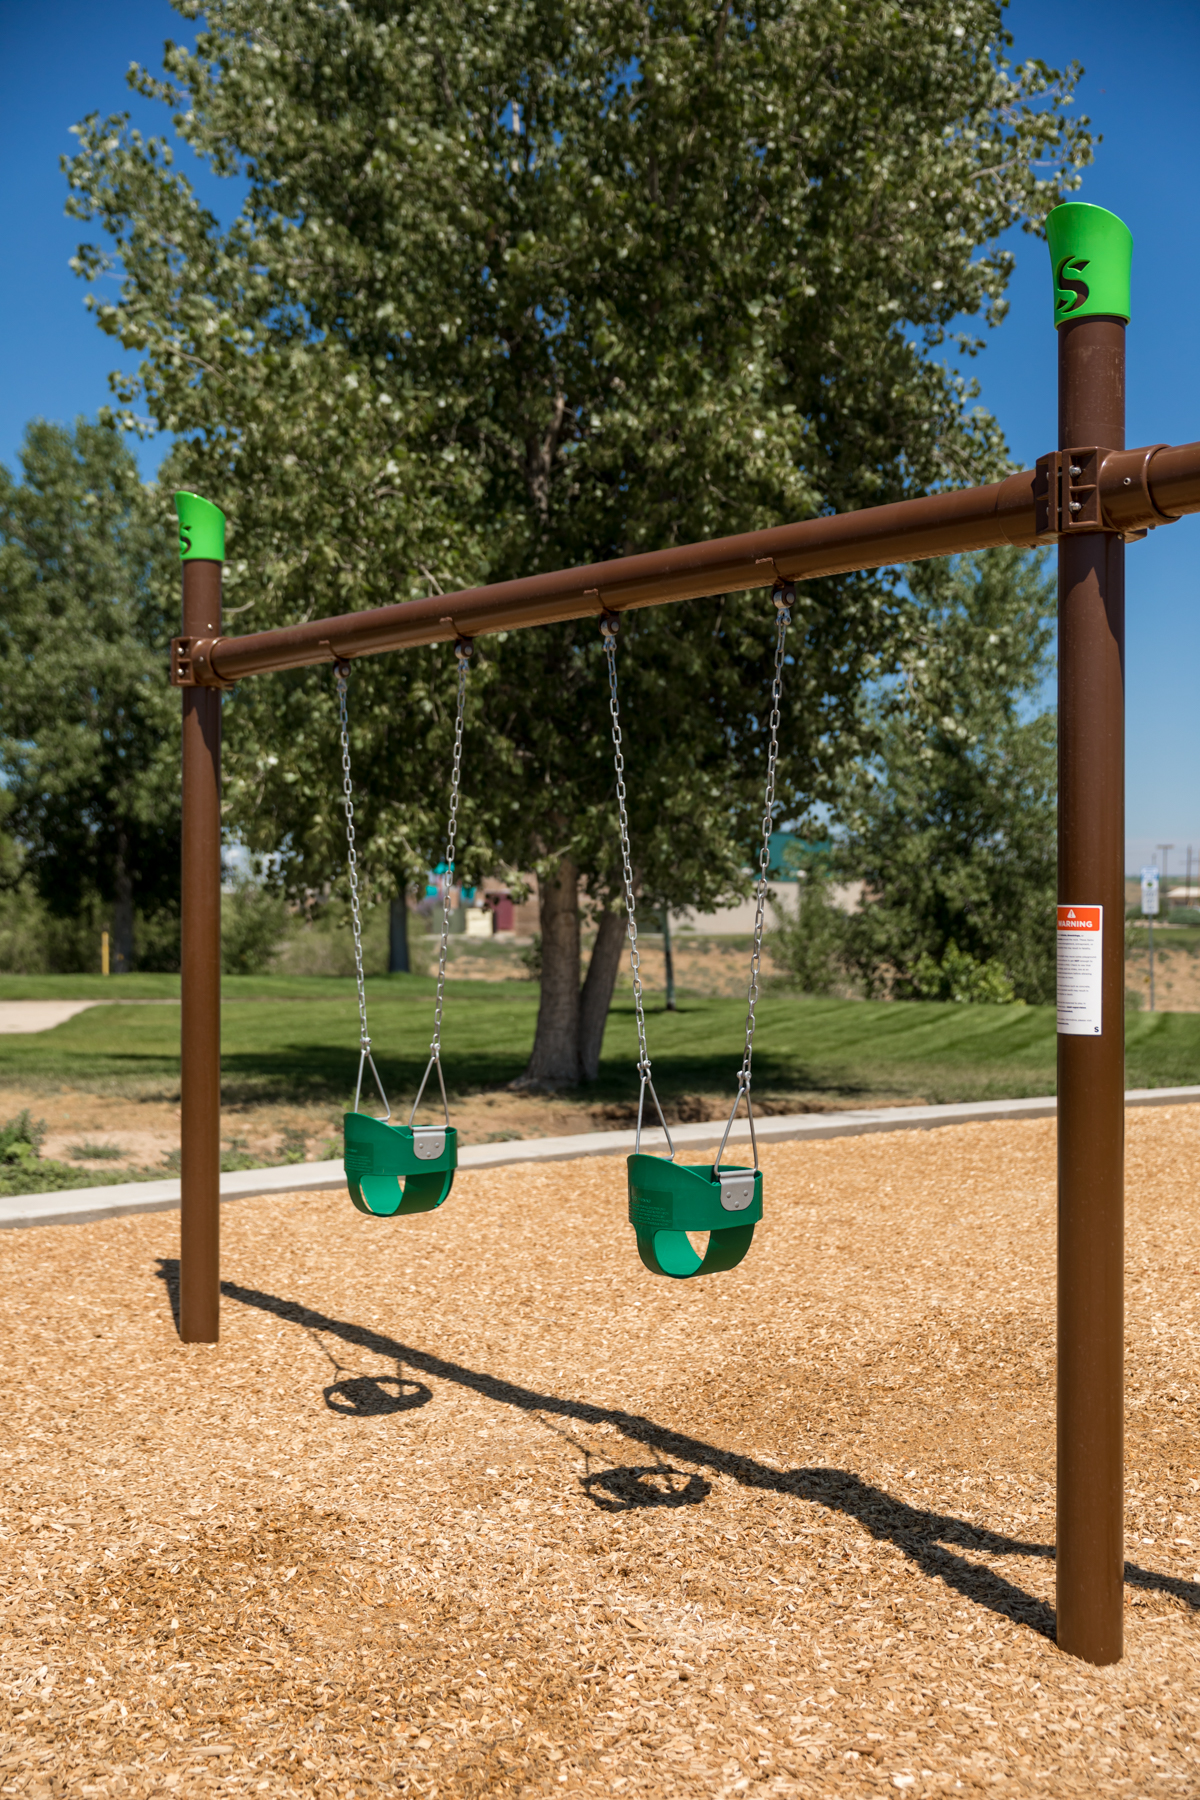 5 Single Outdoor Playground Post Swing Frame